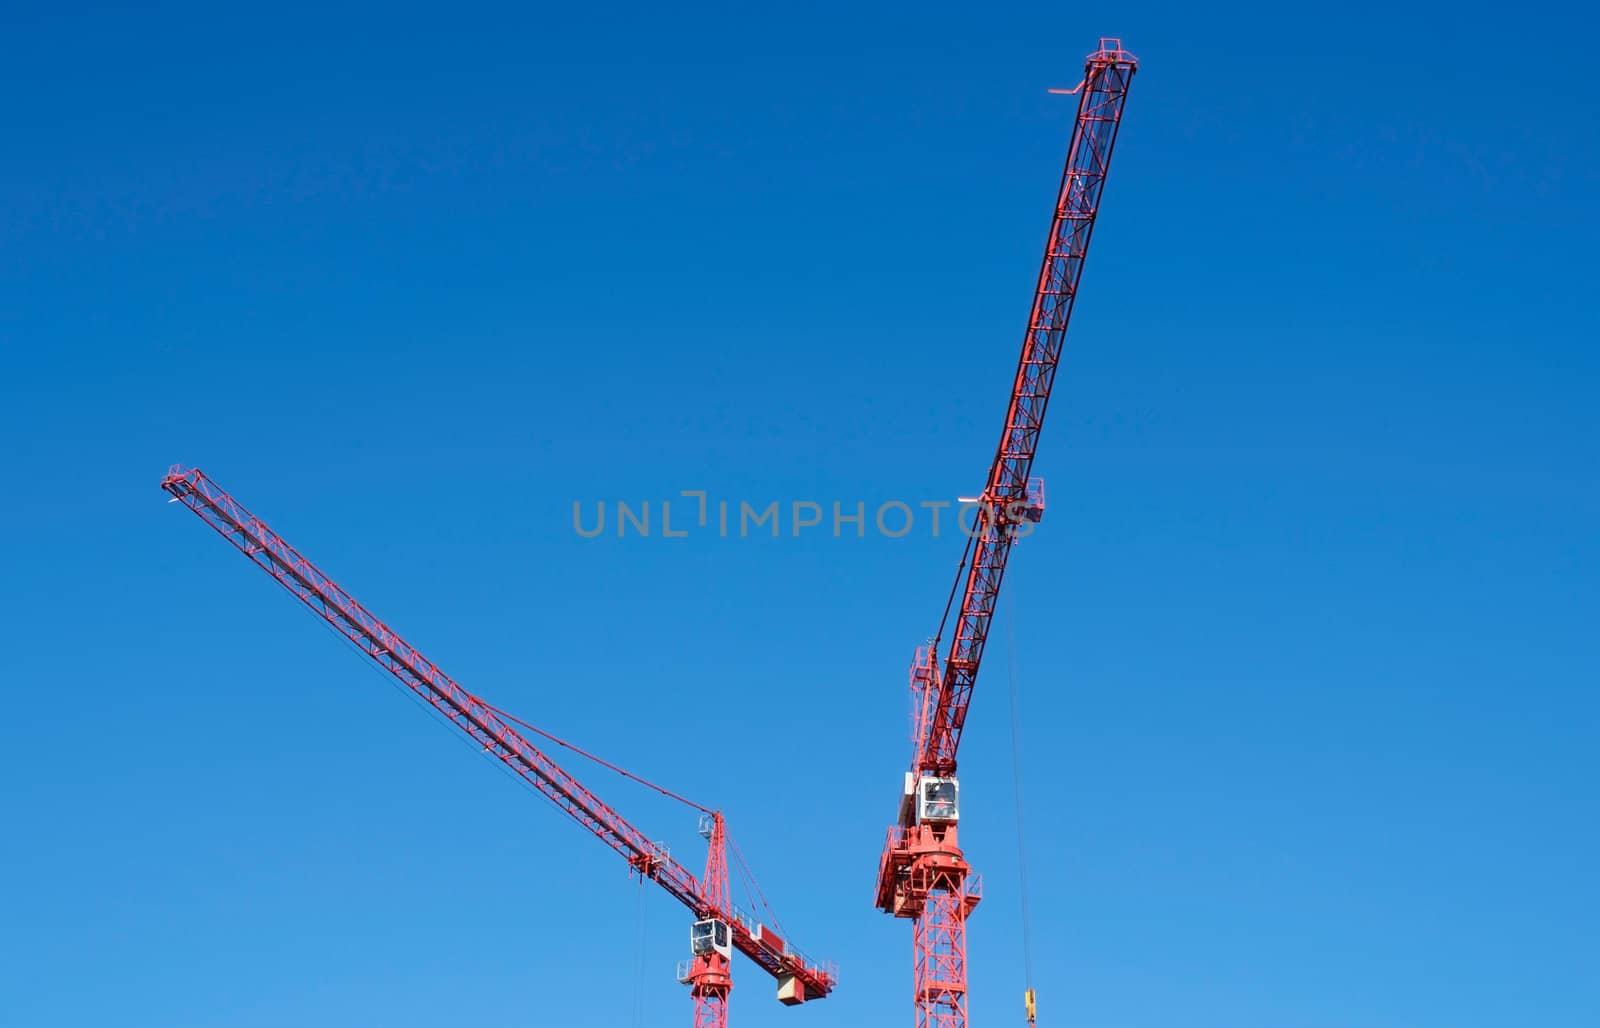 Two cranes working high above city